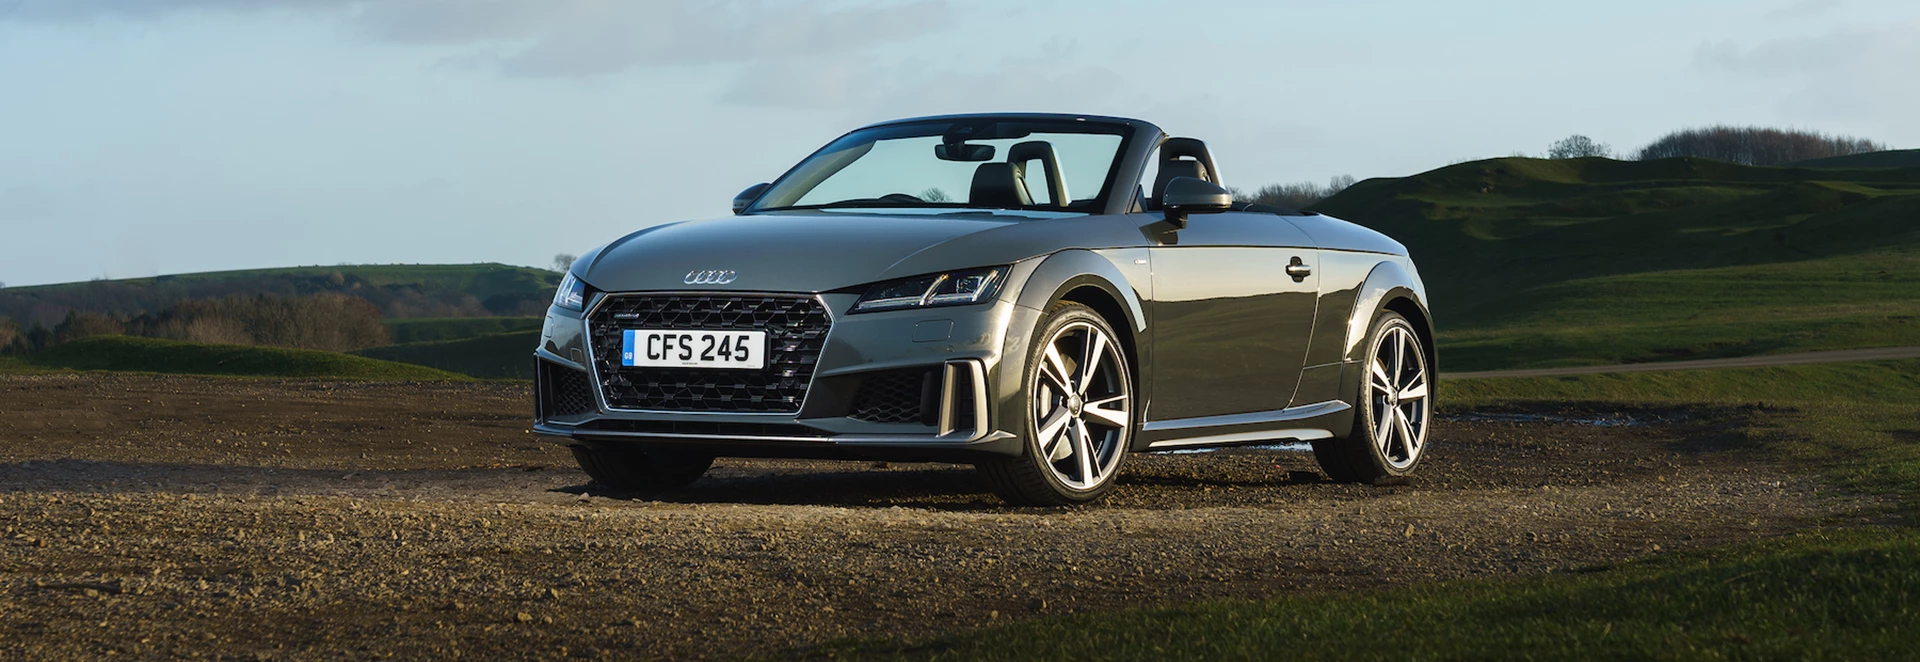 10 best convertibles to enjoy over the summer 